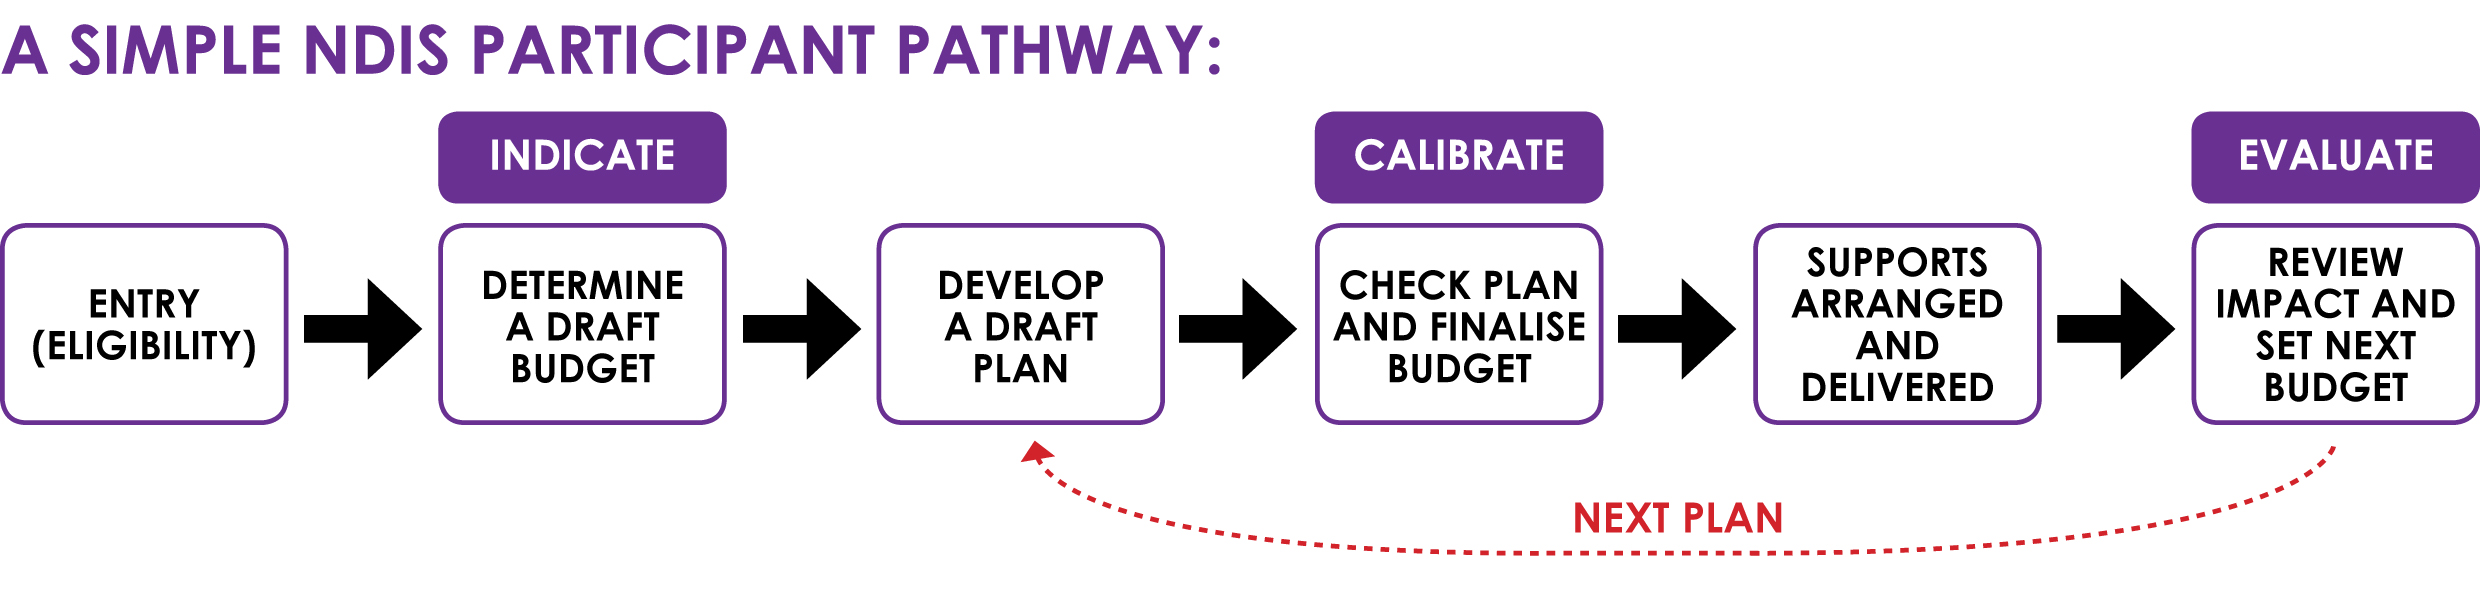 Simple NDIS participant pathway flowchart.